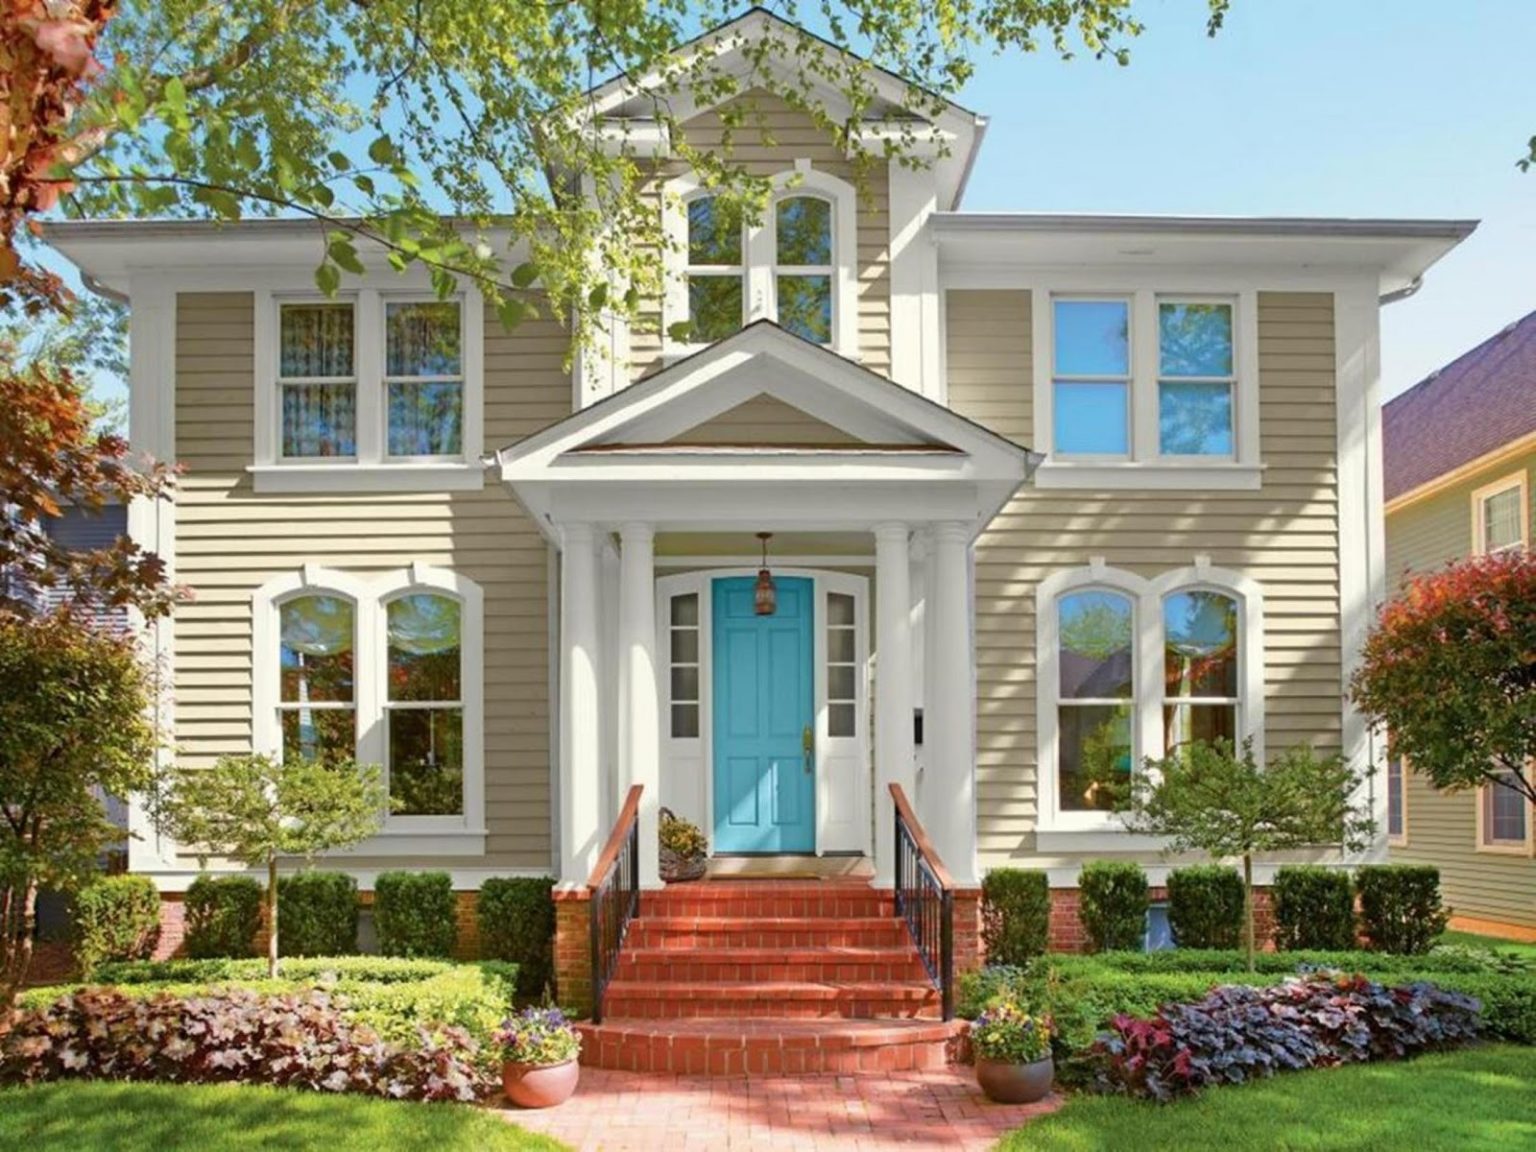 10 Inspiring Cottage Exterior Paint Color Ideas - Opptrends 2022